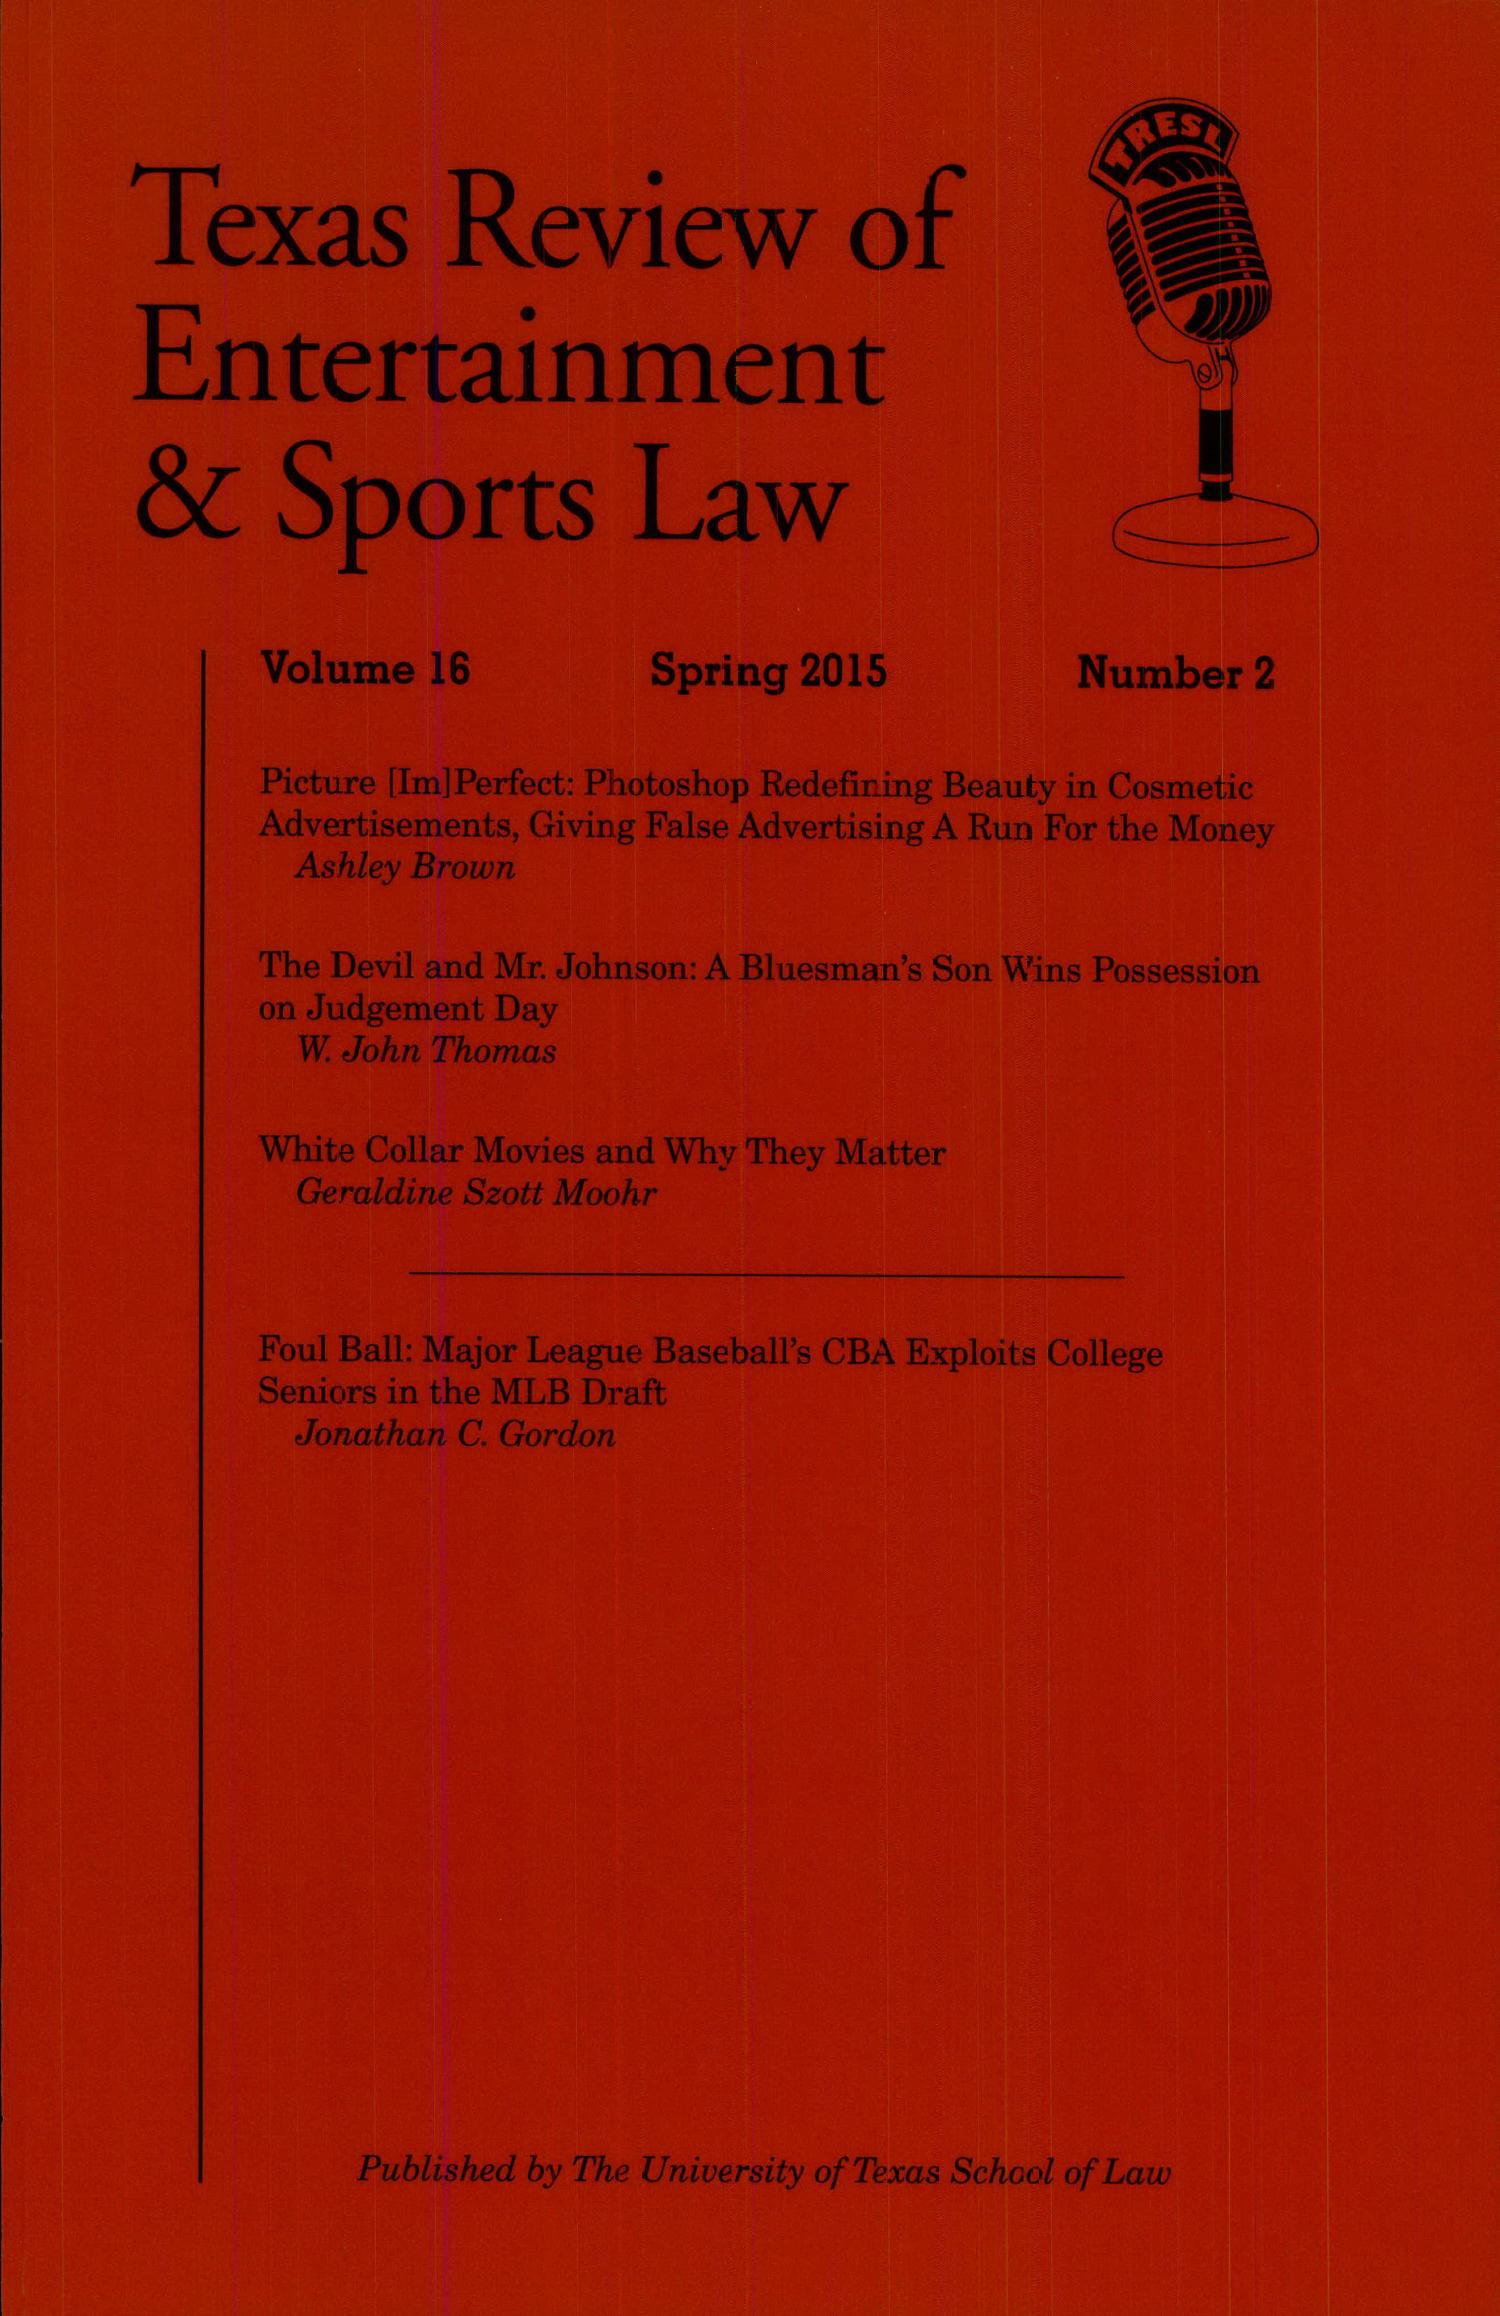 Texas Review of Entertainment & Sports Law, Volume 16, Number 2, Spring 2015
                                                
                                                    Texas Review Of Enterainment & Sports Law
                                                